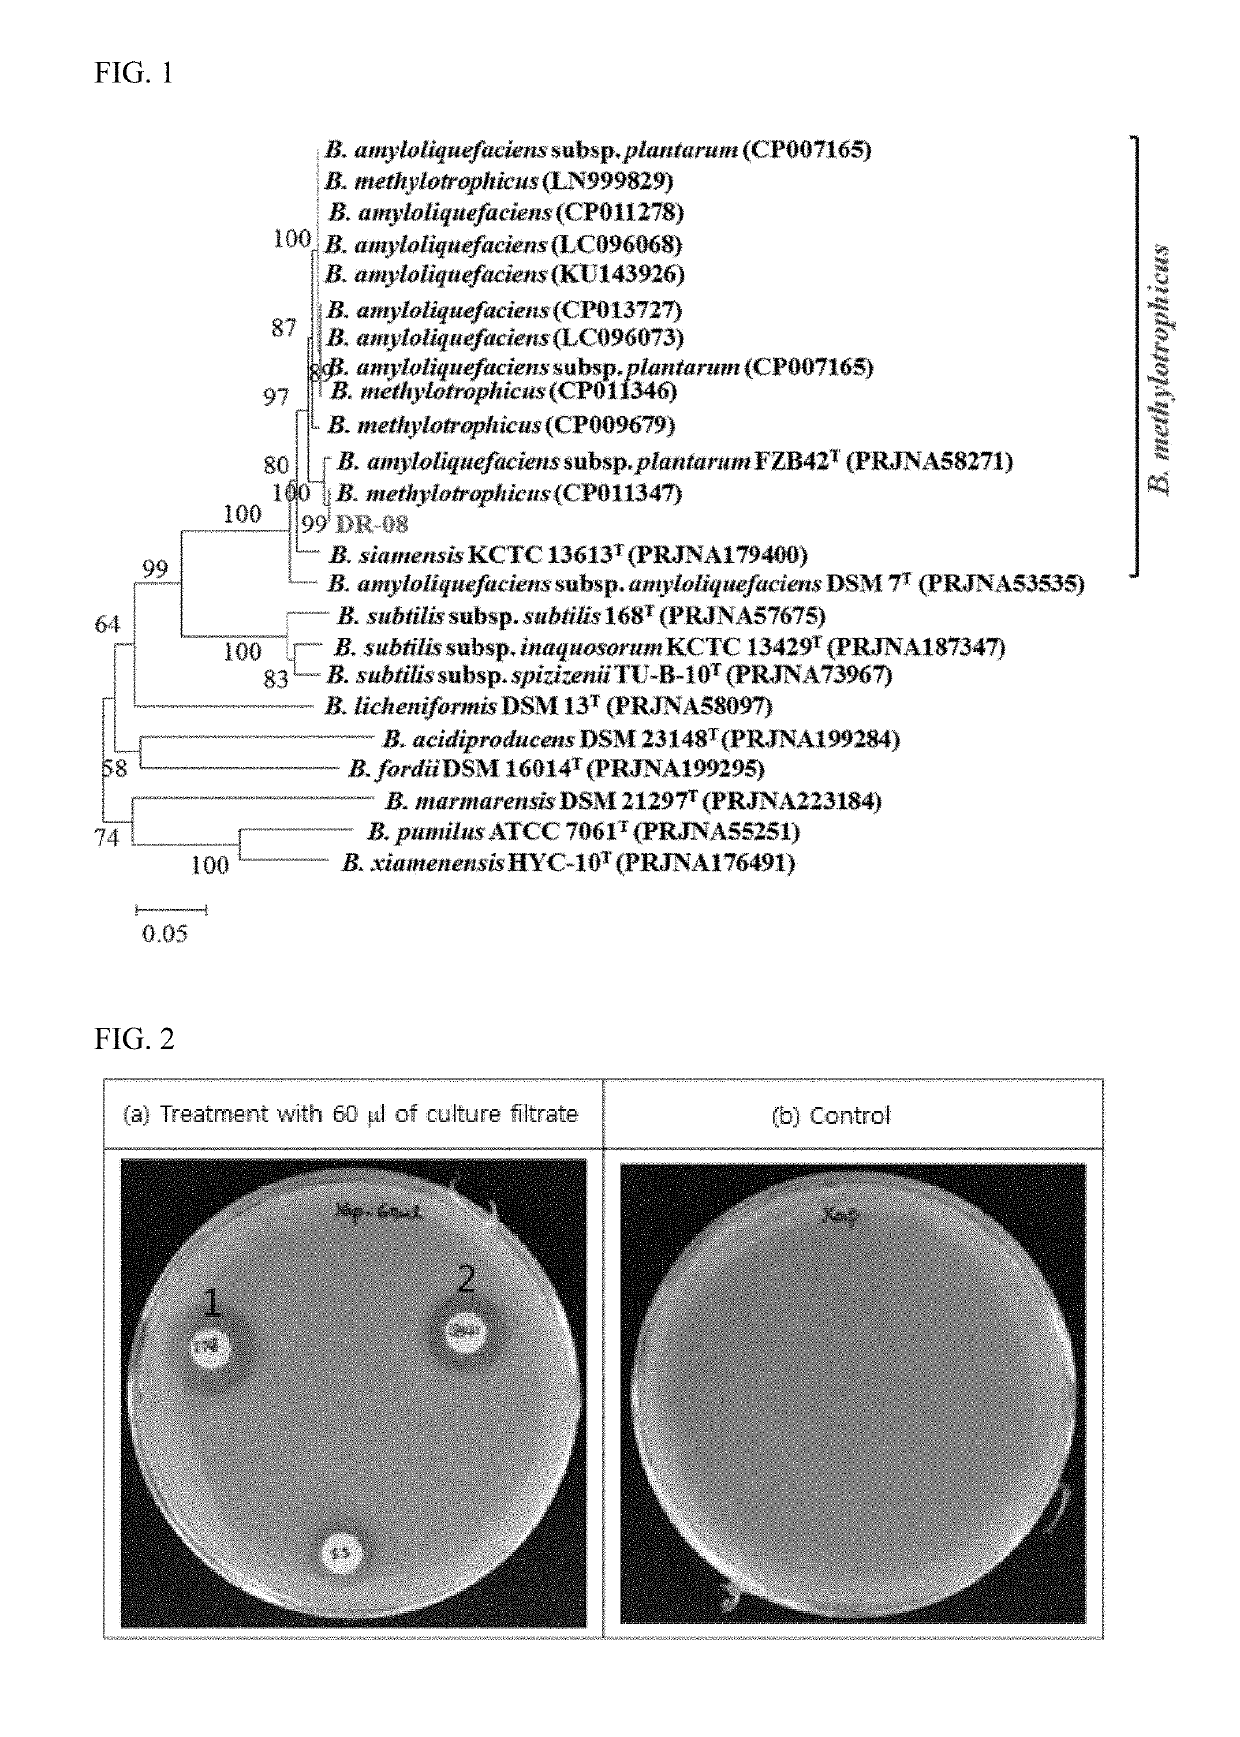 Bacillus methylotrophicus strain dr-08 producing natural volatile compound and having antibacterial activity, and use thereof